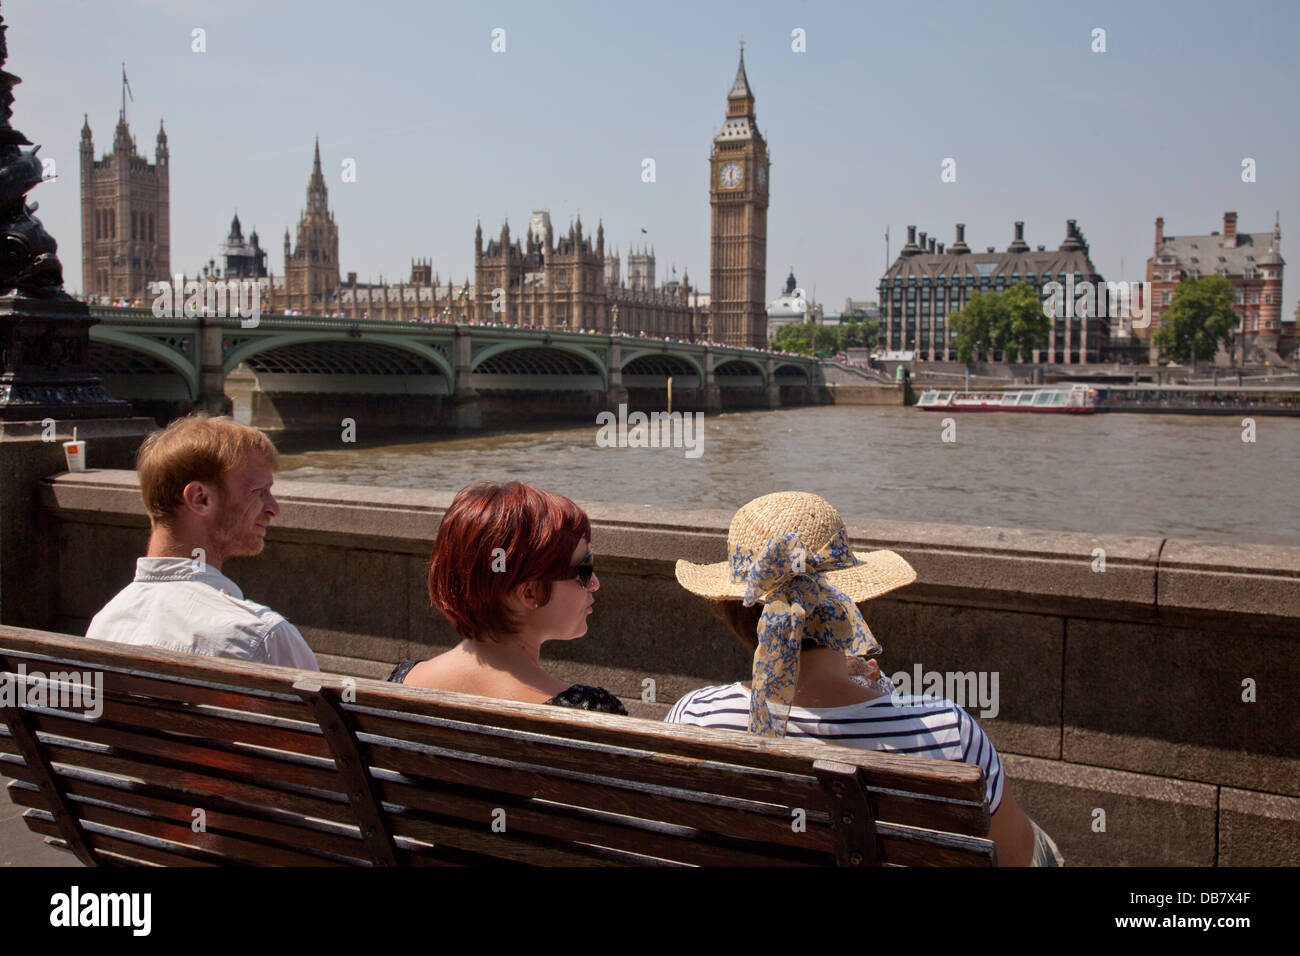 Tourists sit on bench opposite Houses of Parliament by Thames river in London Stock Photo